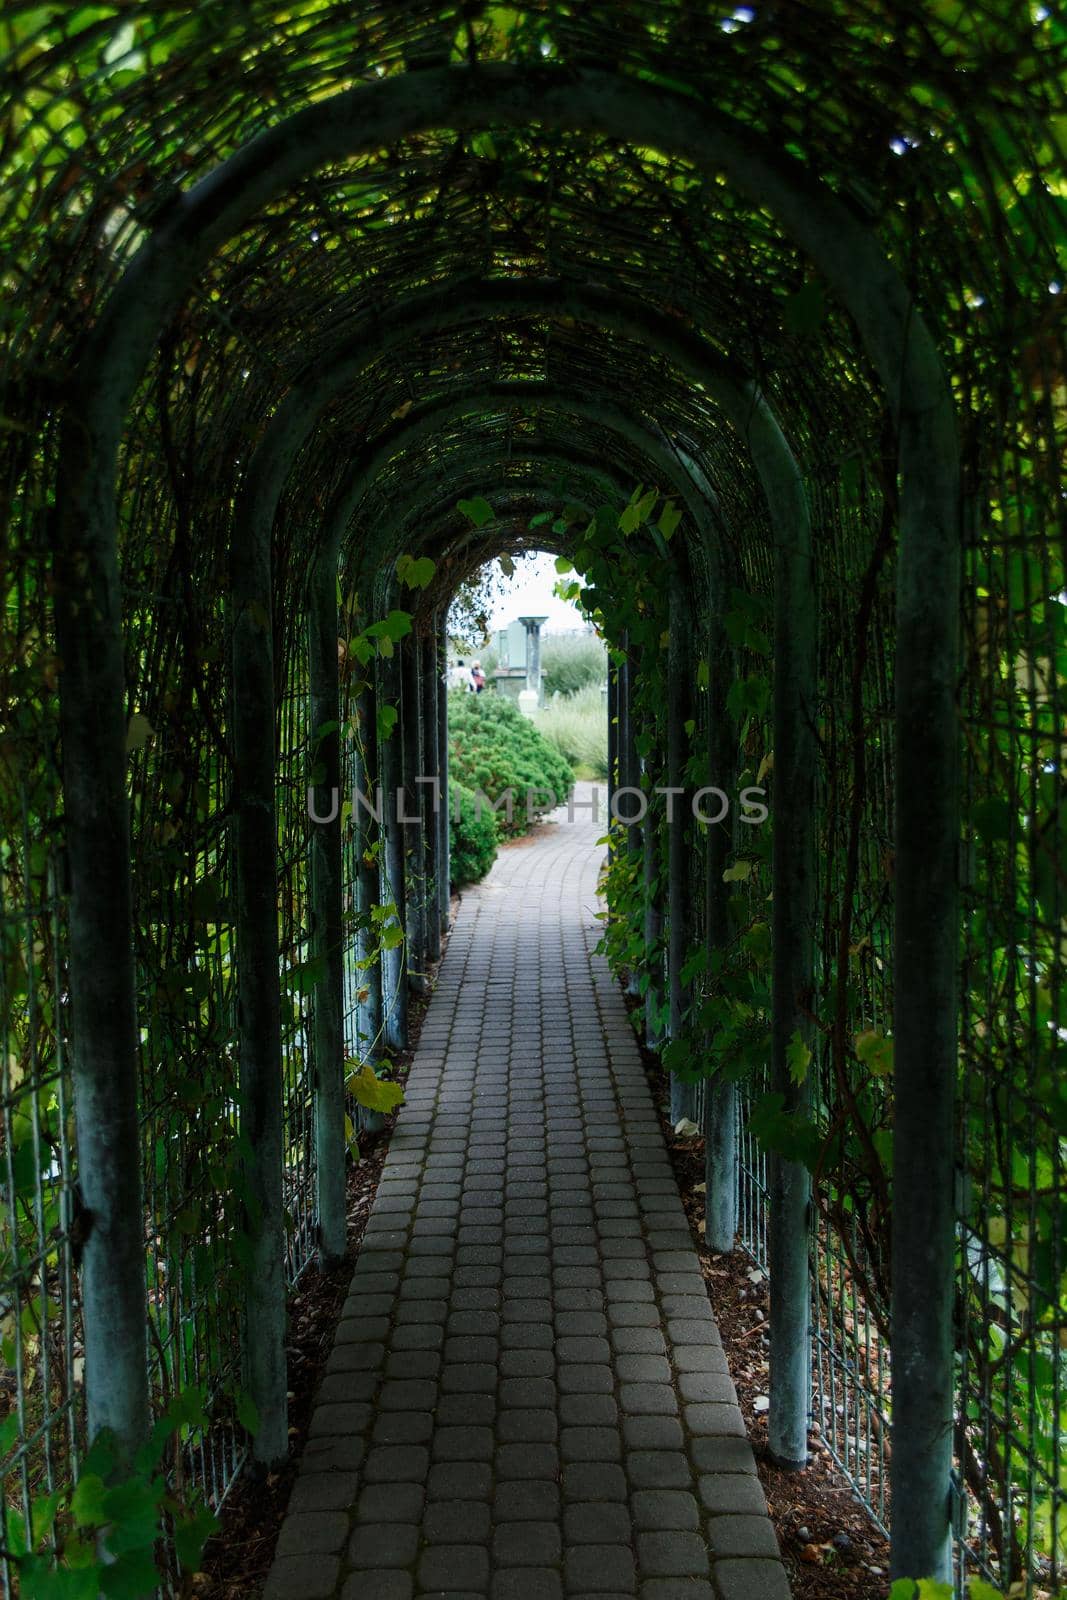 Pedestrian tunnel overgrown with wild grapes by BY-_-BY